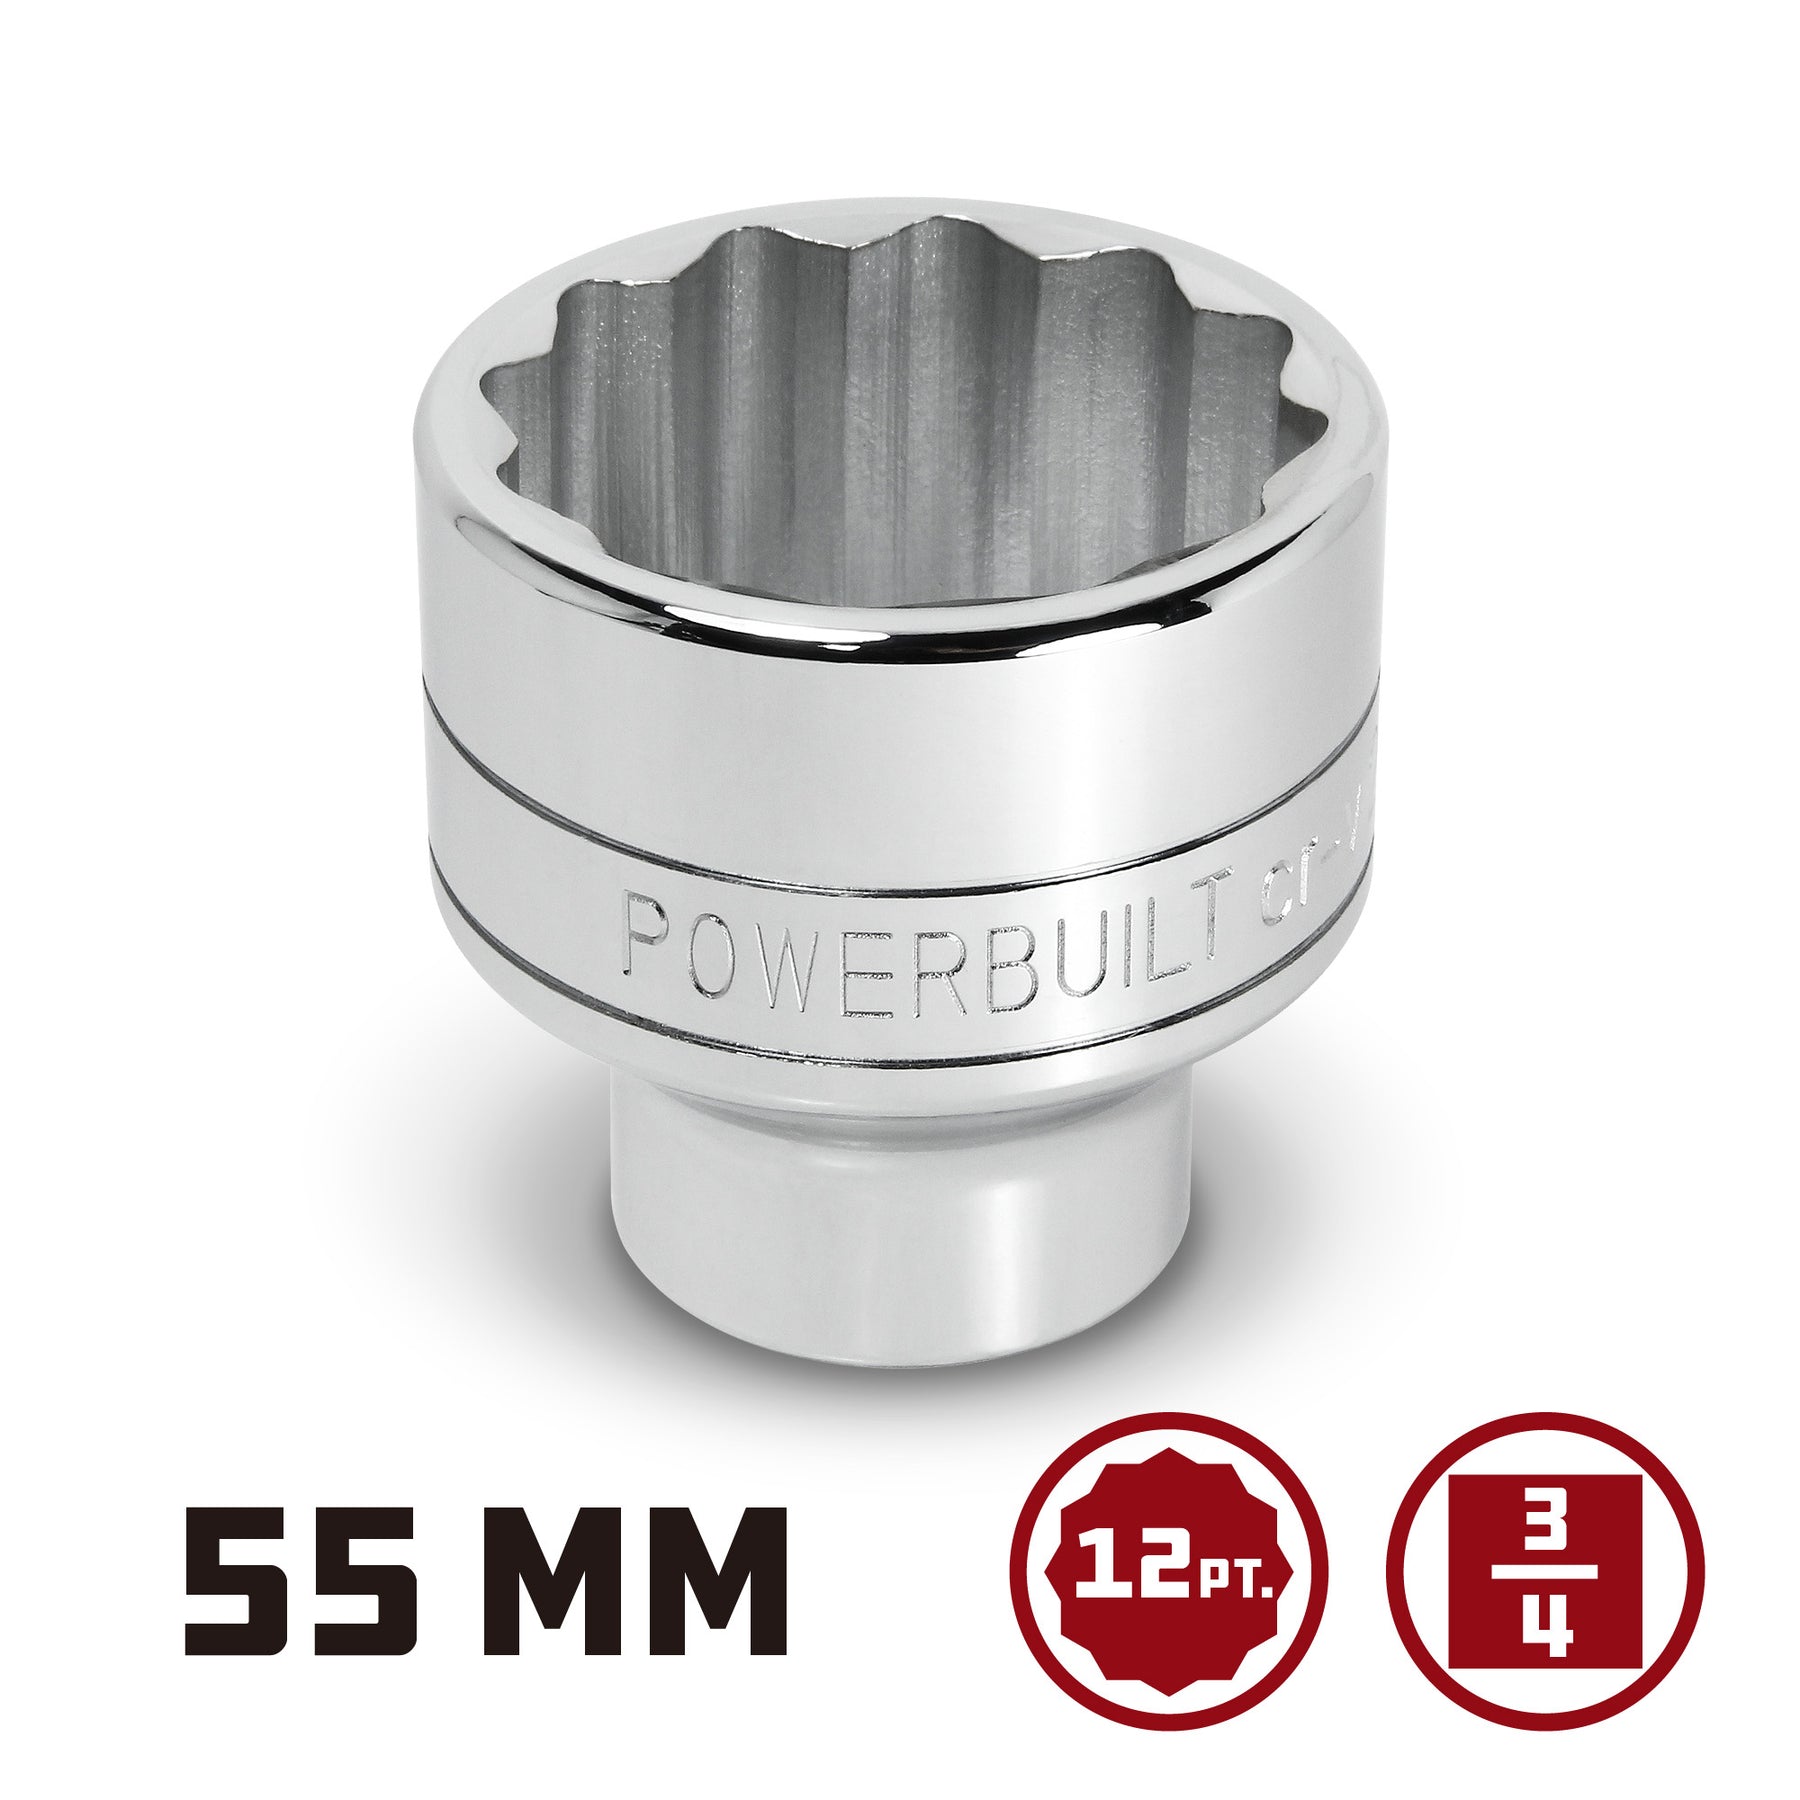 3/4 Inch Drive x 55 MM 12 Point Shallow Socket